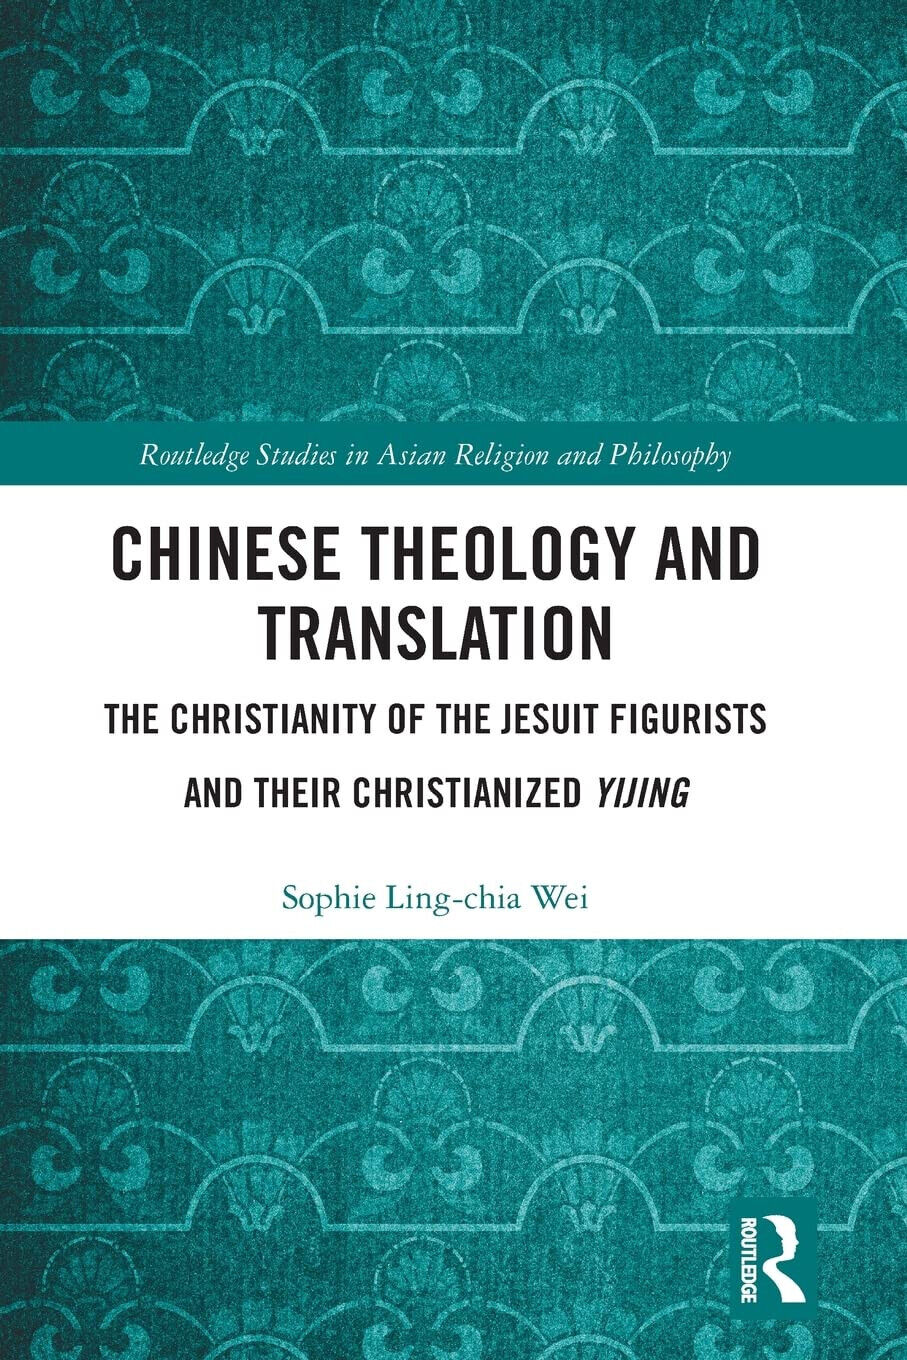 Chinese Theology And Translation - Sophie Ling-chia Wei - Routledge, 2021